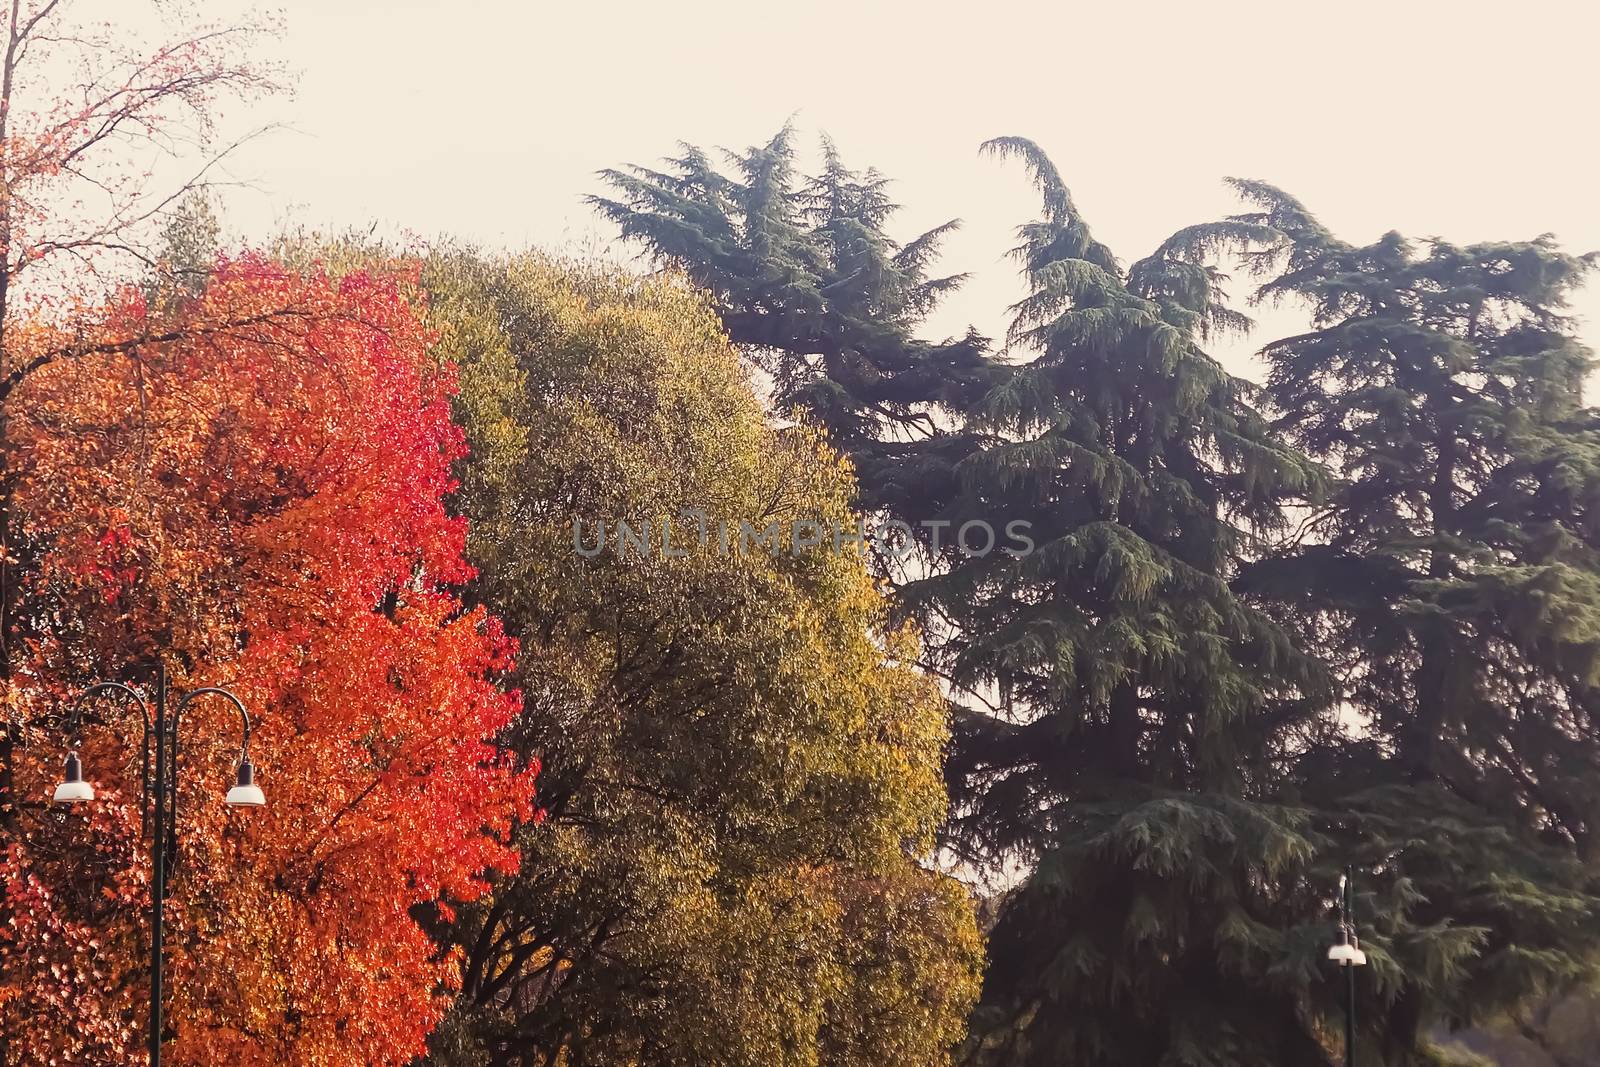 Autumn nature in park, fall leaves and trees outdoors, beautiful season in Milan, Lombardy region in Northern Italy